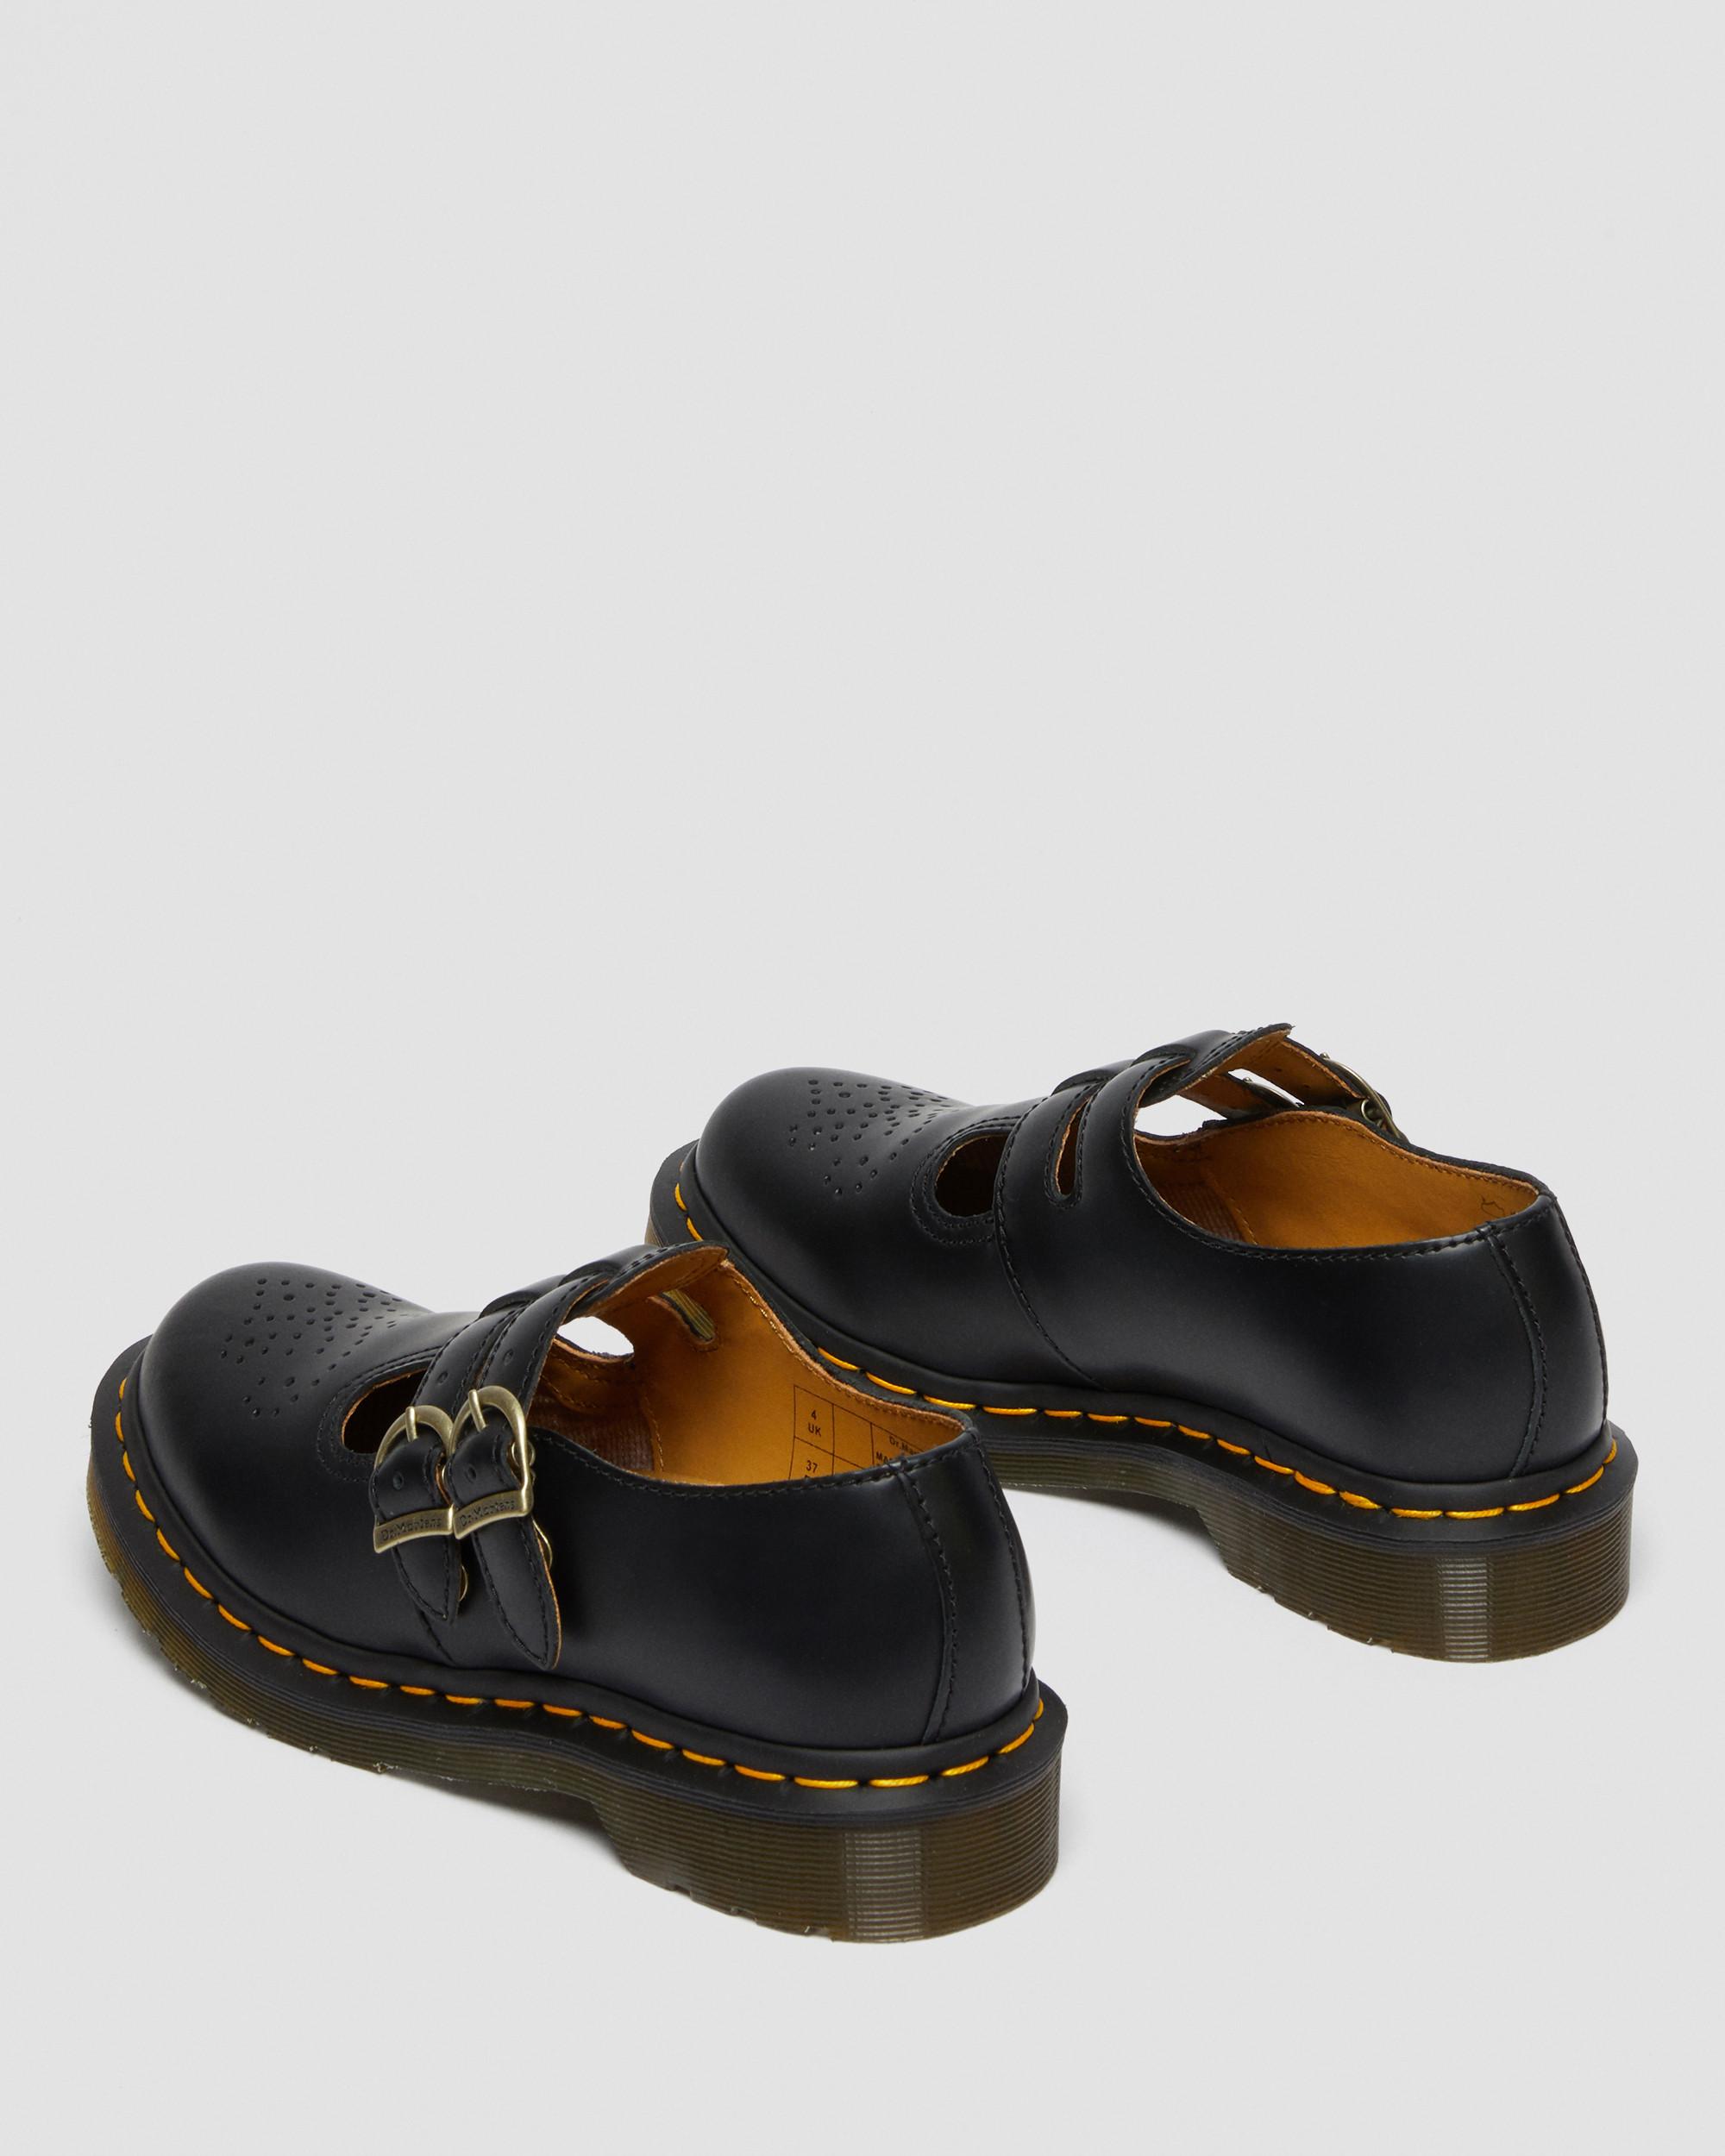 Black All Sizes Dr Martens 8065 Leather Double Strap Girls Footwear Shoe 